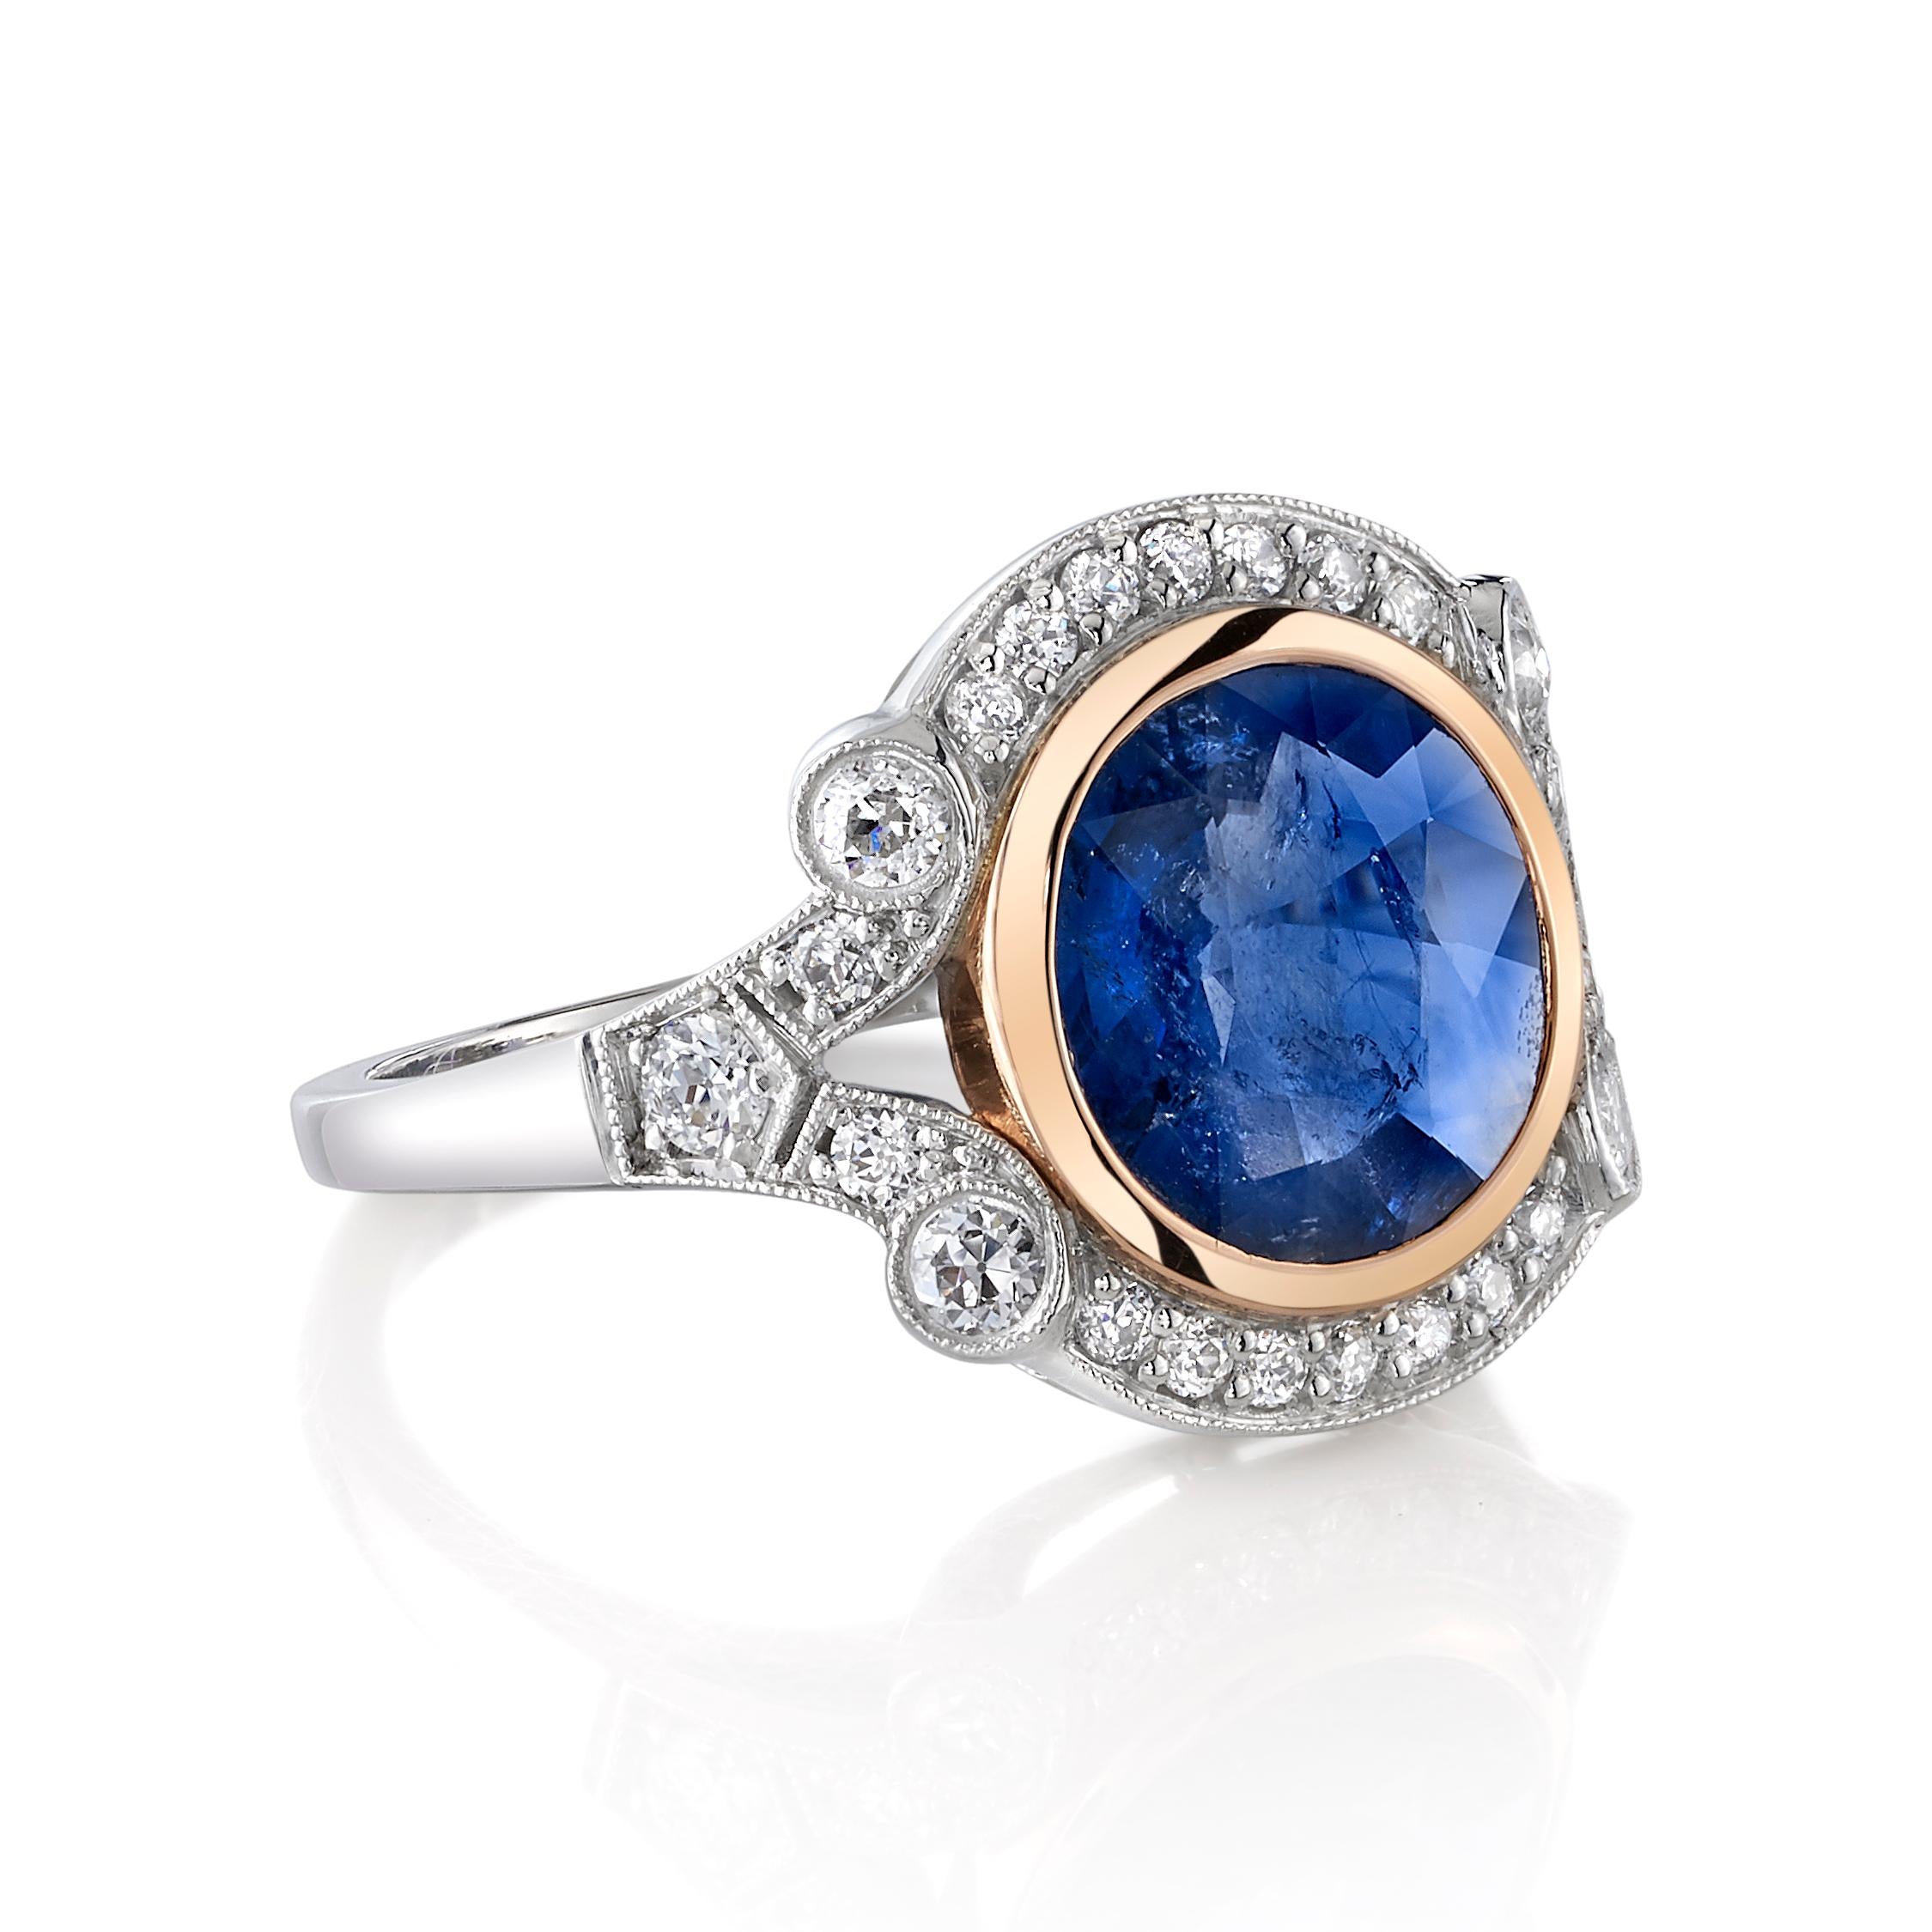 2.77ctw Round cut blue sapphire set in a handcrafted platinum and 18K rose gold mounting. 0.50ctw old European cut accent diamonds set in scrolling platinum surround this deep blue sapphire.

Ring is currently a size 6 and can be sized to fit. 